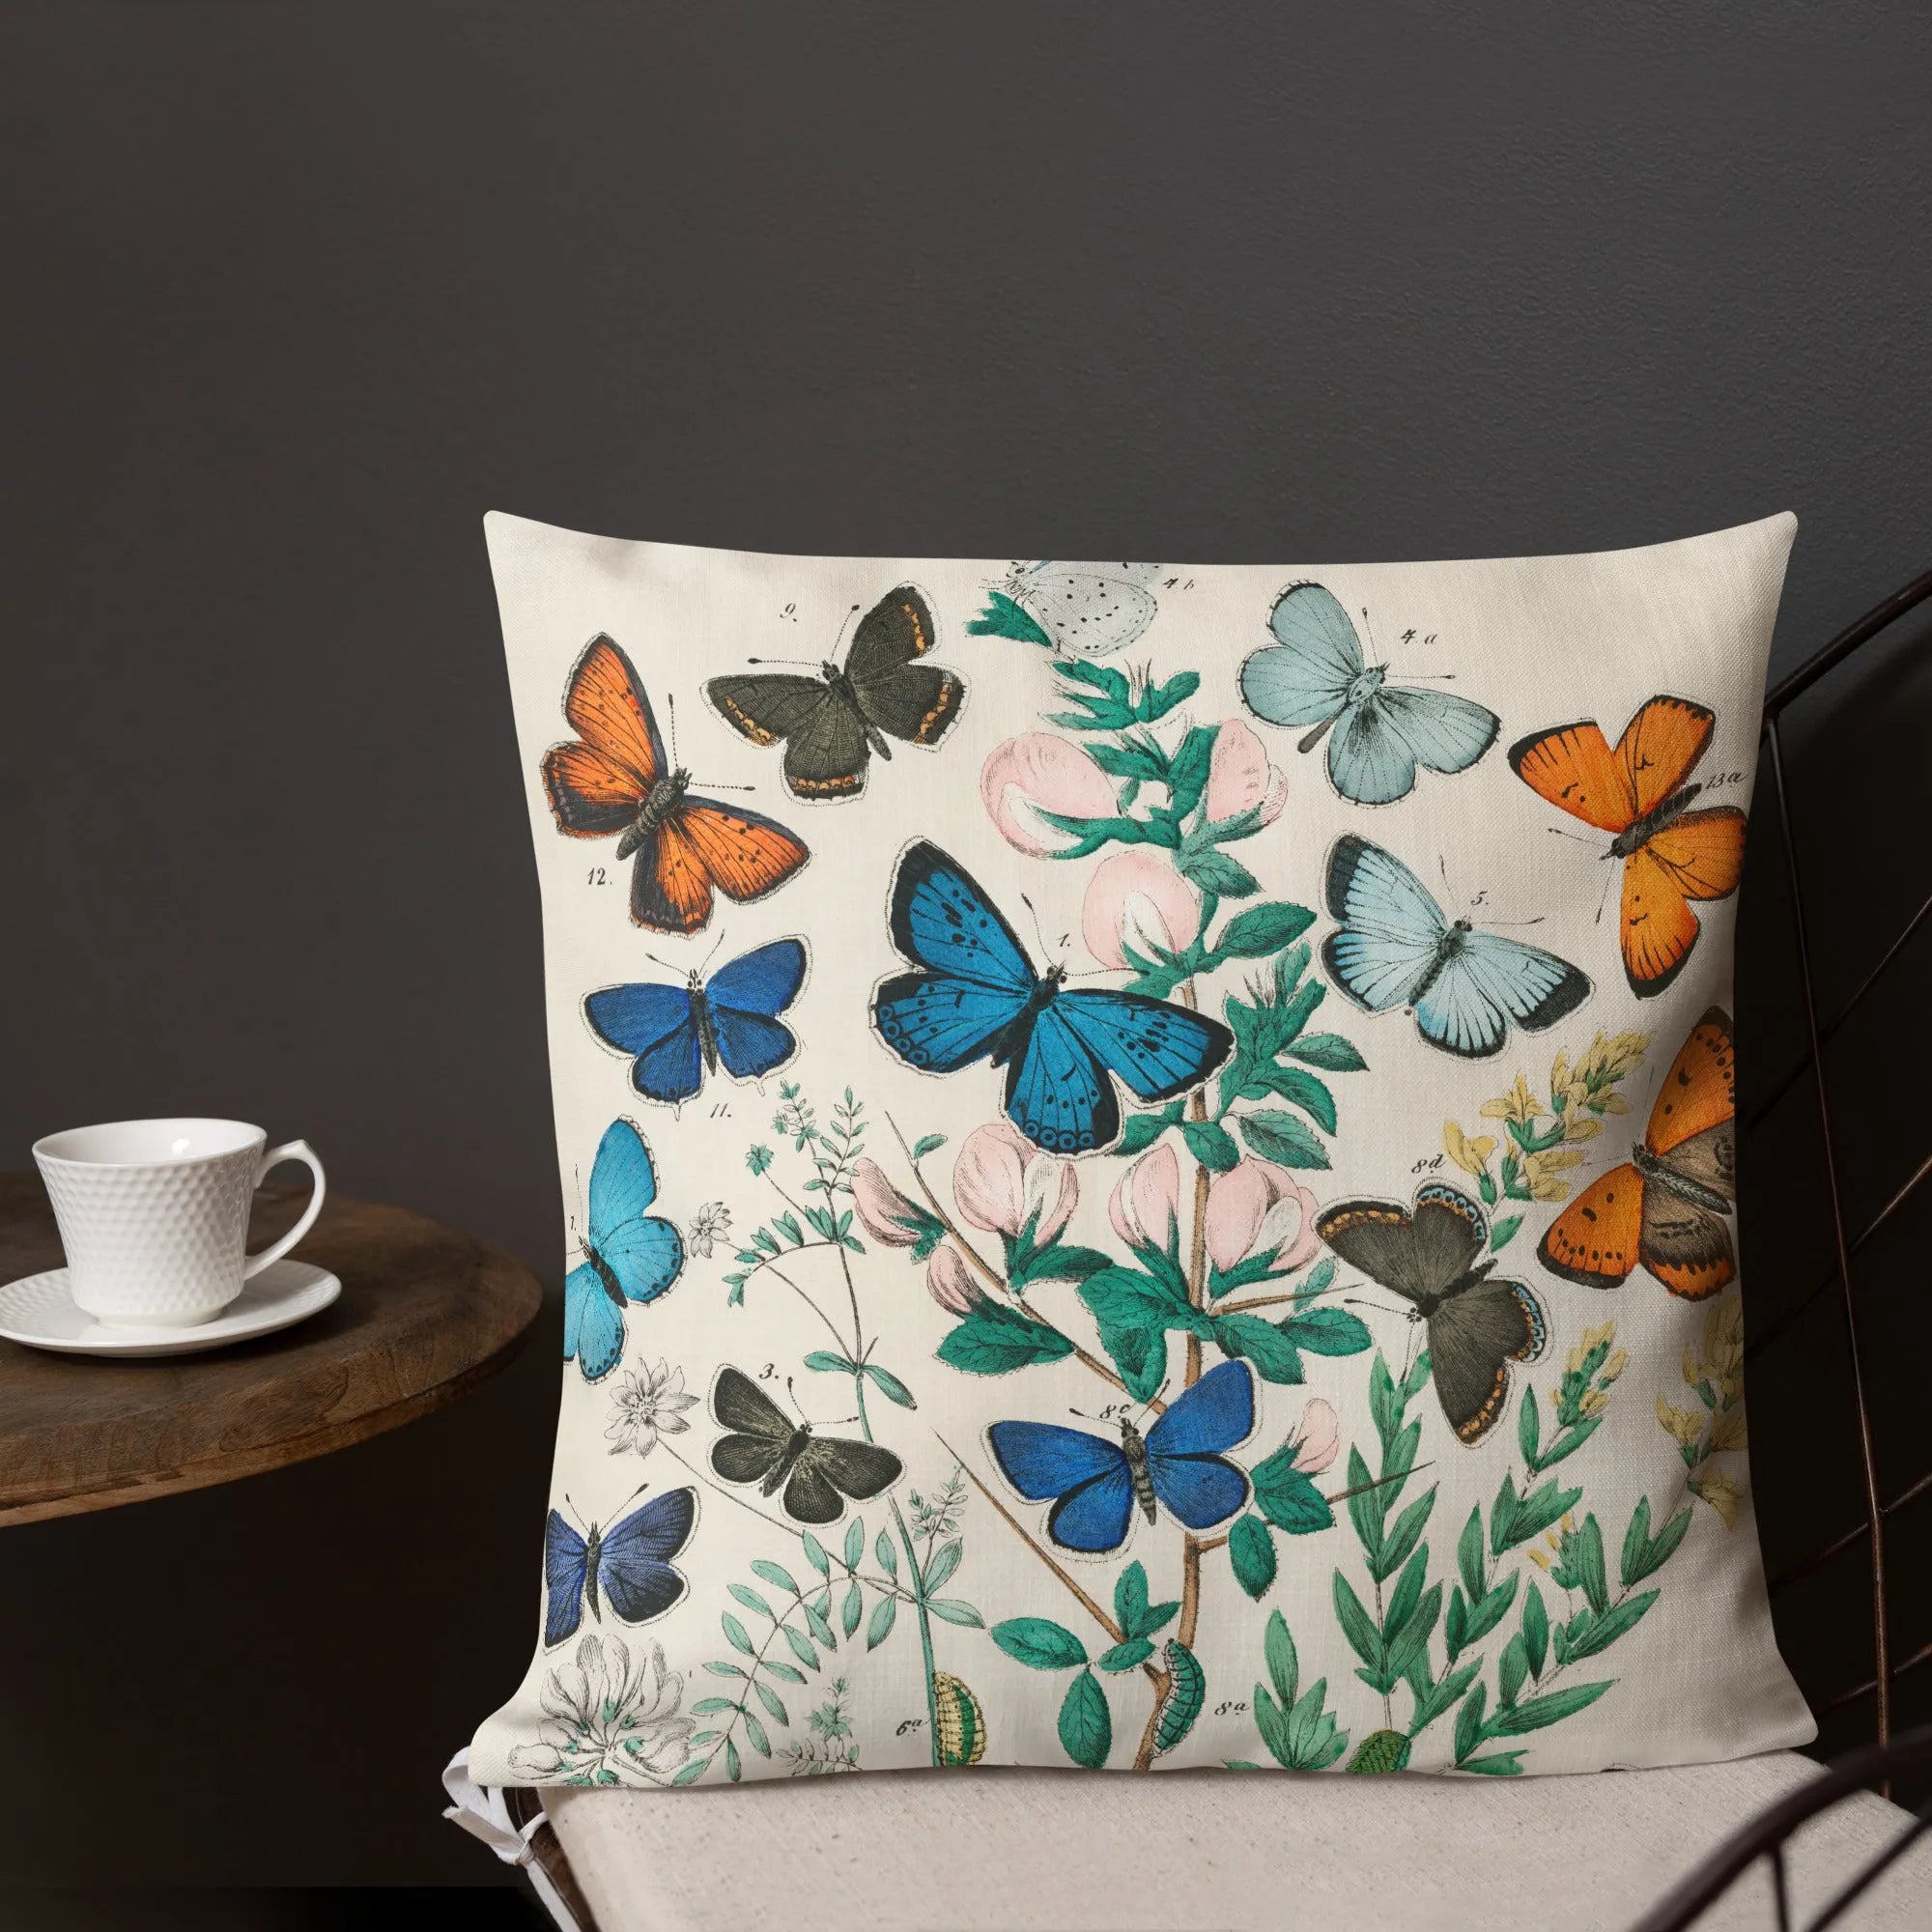 European Butterflies And Moths By William Forsell Kirby Cushion - Throw Pillows - Aesthetic Art